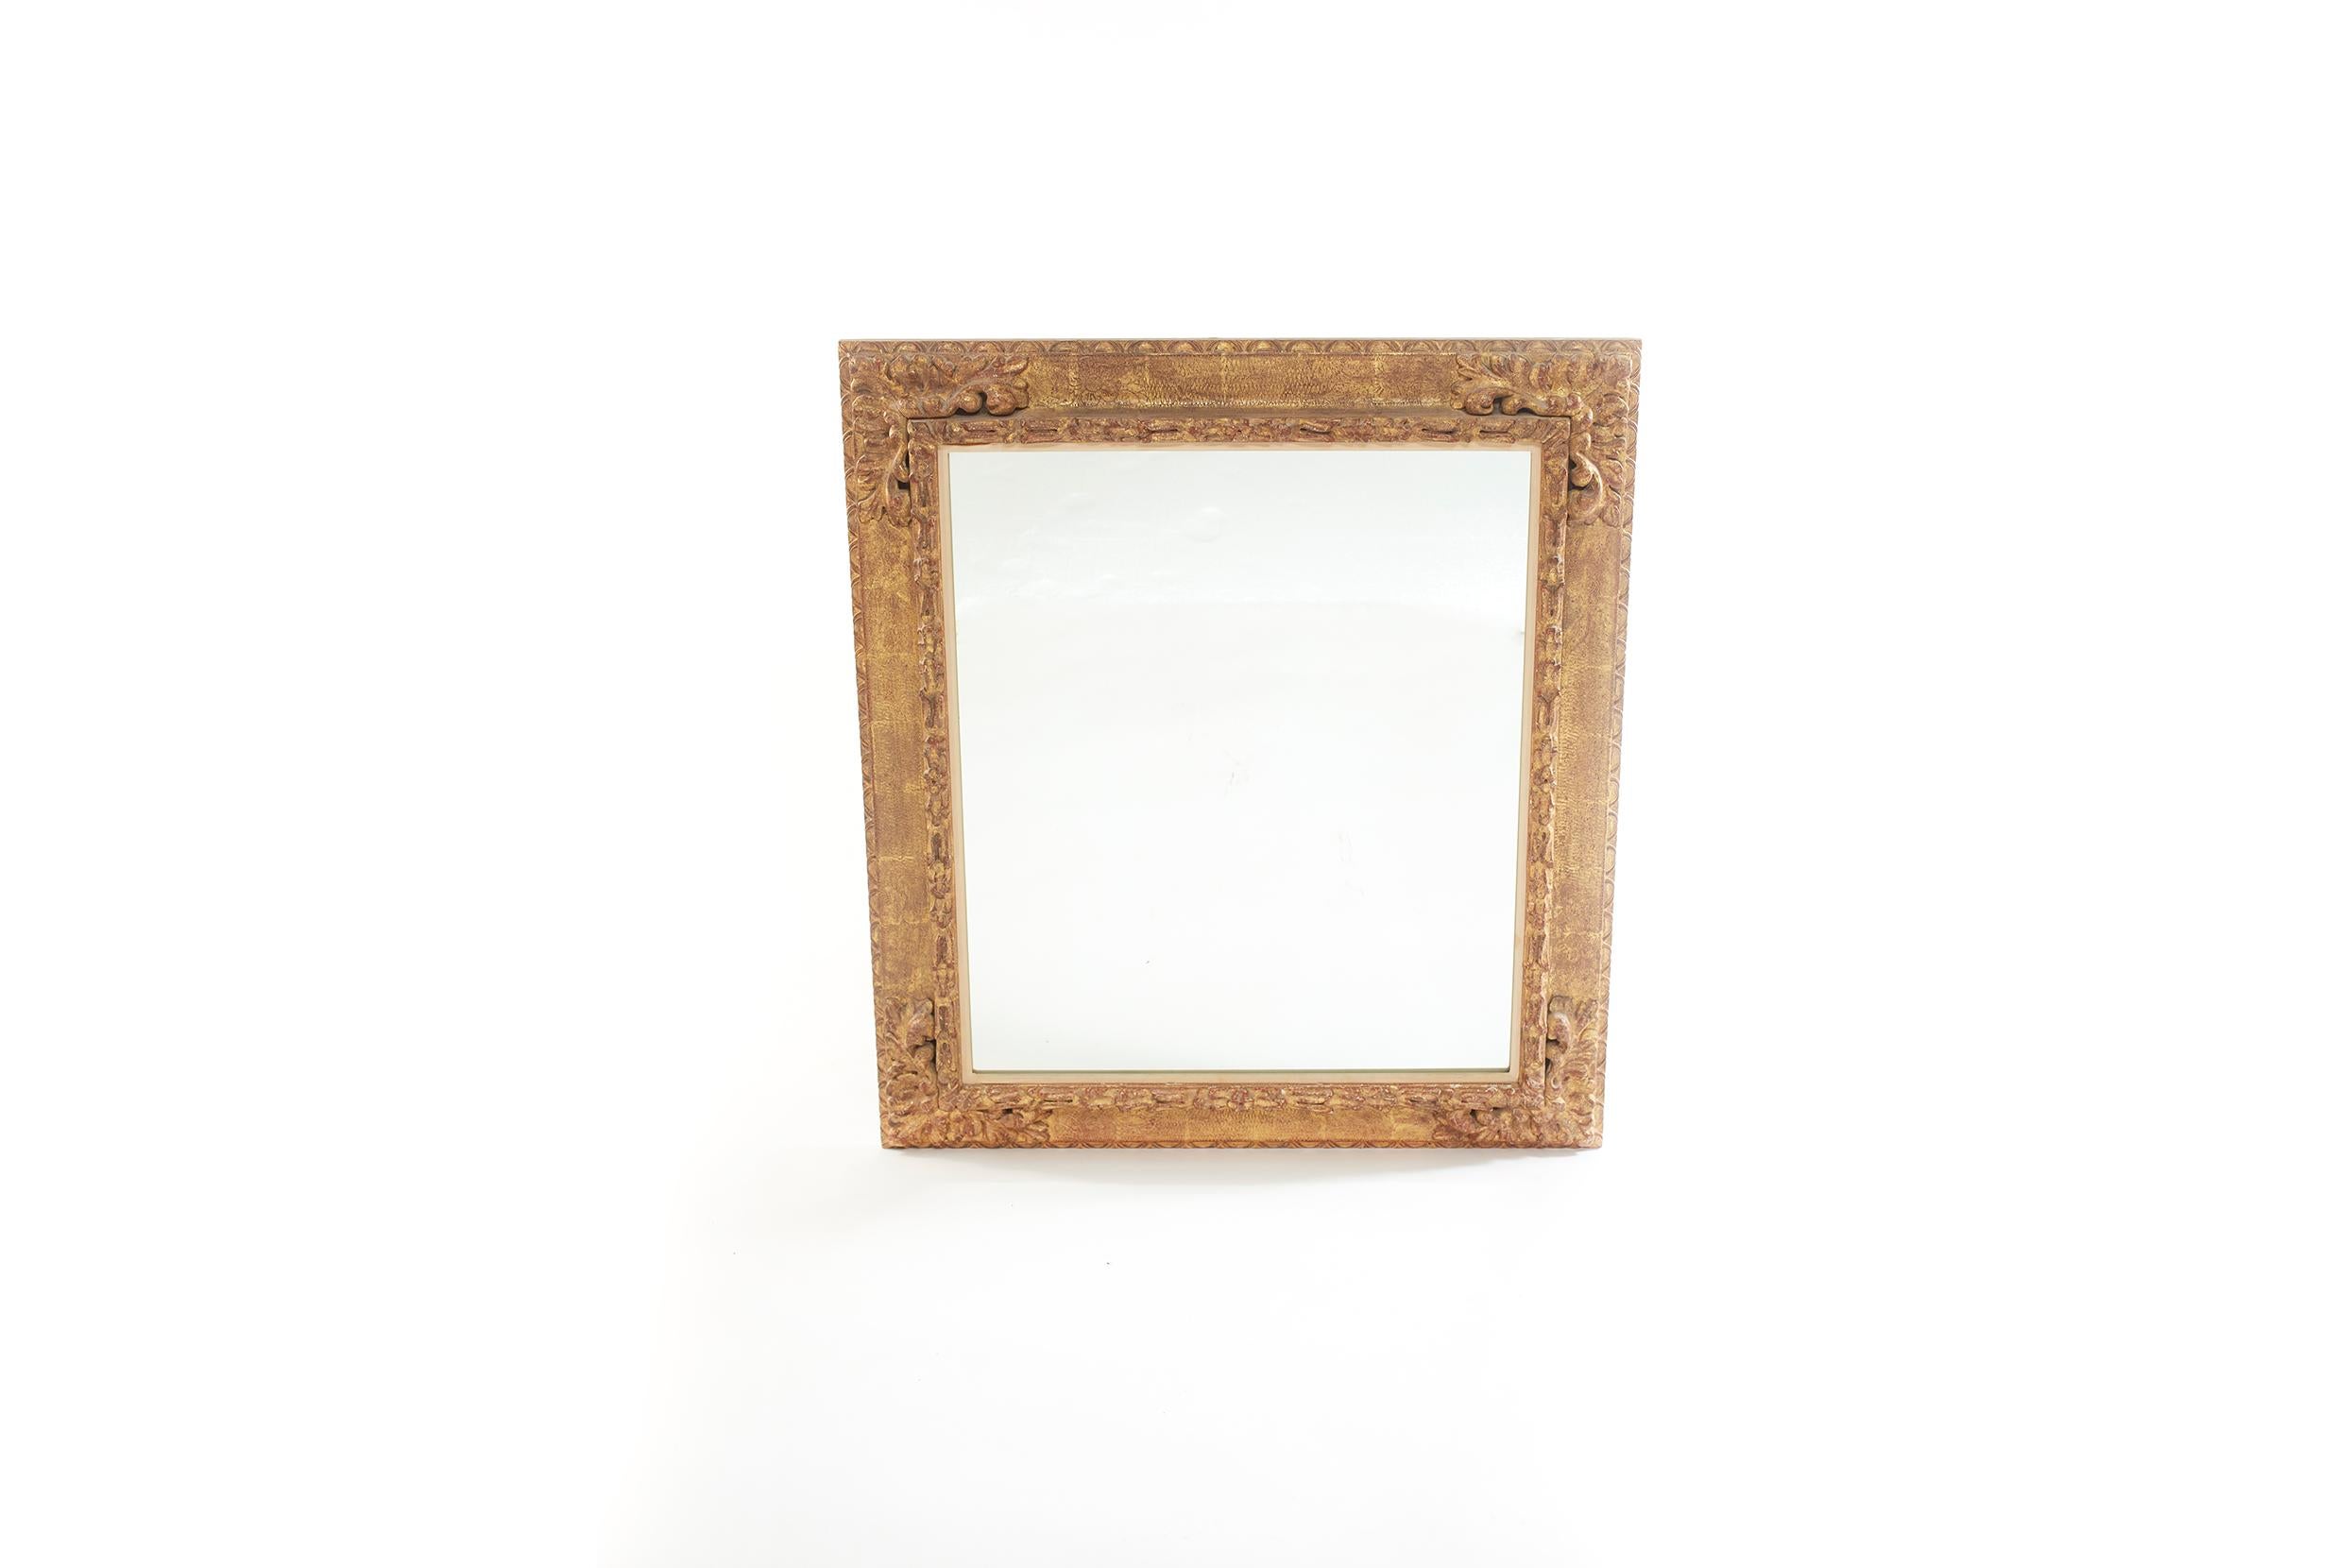 Pair of gilt wood framed beveled hanging wall mirror in an square shape with hand carved design details motif. The mirror is in good condition. Minor wear consistent with age / use. The gilt wood frames measure 38.5 inches high x 33.5 inches wide.